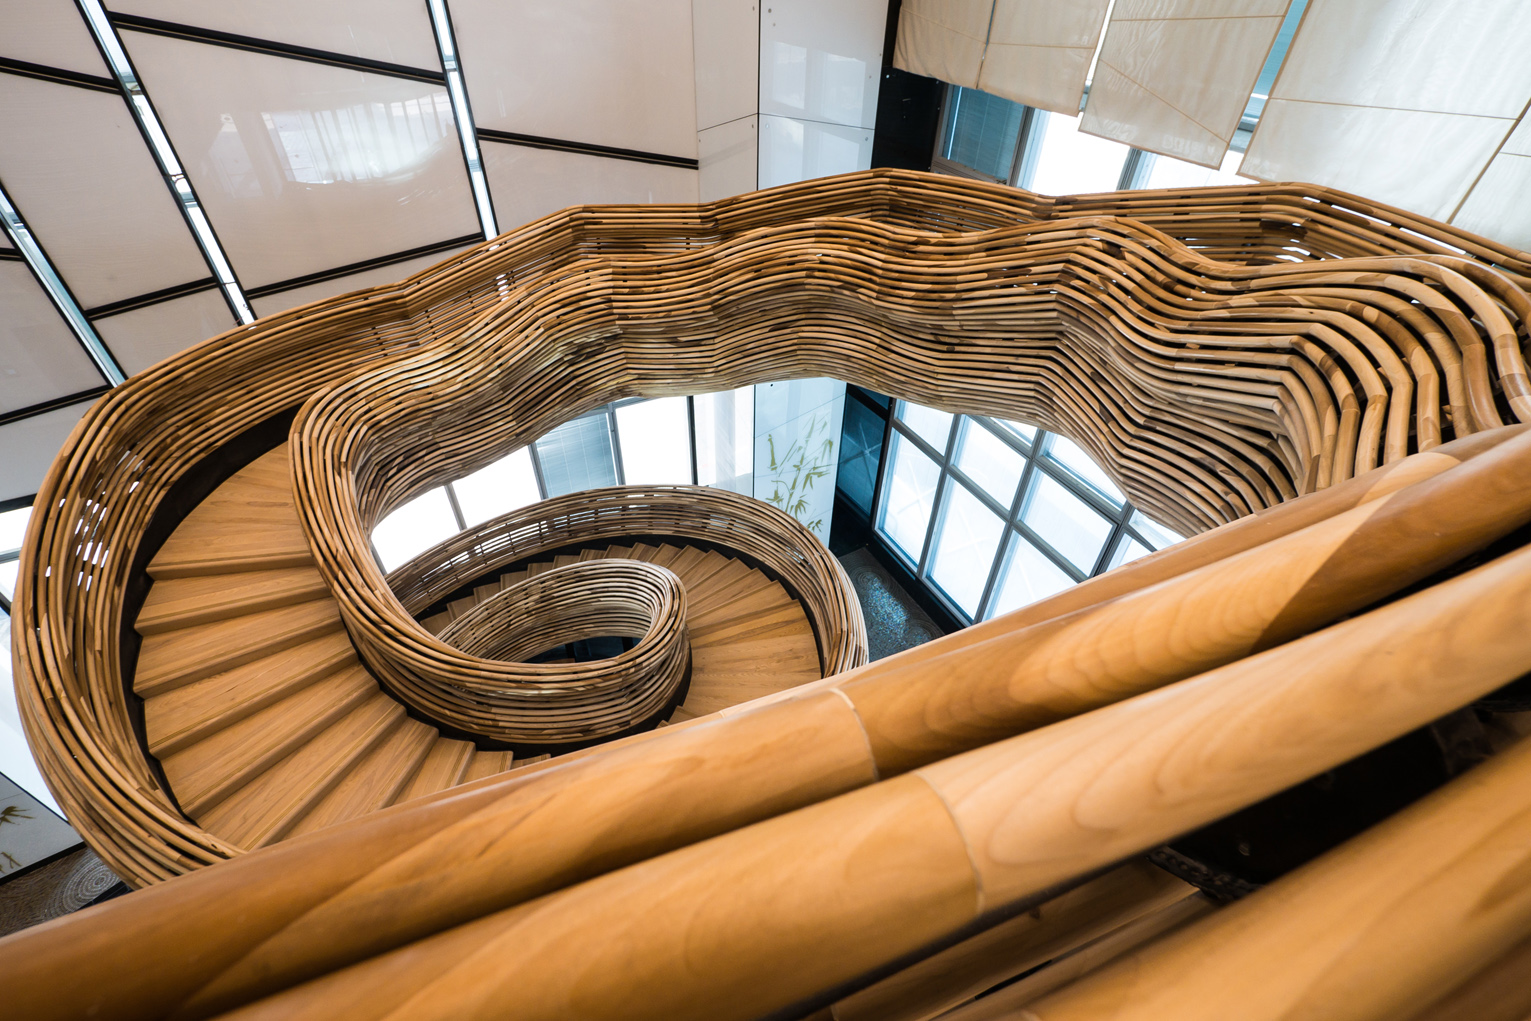 4. Photography by Itay Sikolski - The railings are constructed of 9,000 meters of raw Poplar wood, cut in a CNC machine to form a series of arches that were then assembled in-situ